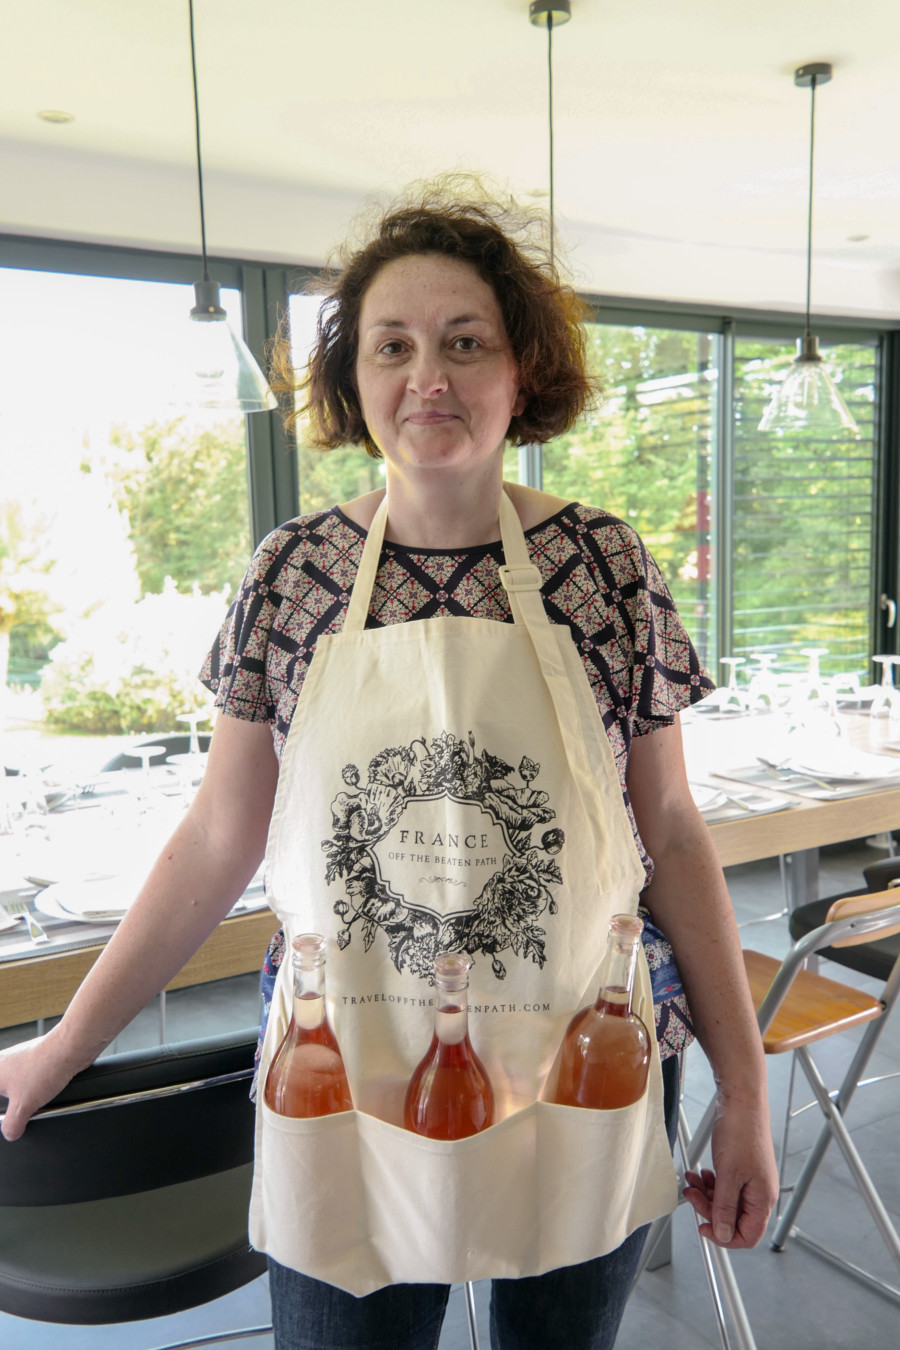 Woman on a cooking class, in an apron, with three bottles of rose wine placed in the apron